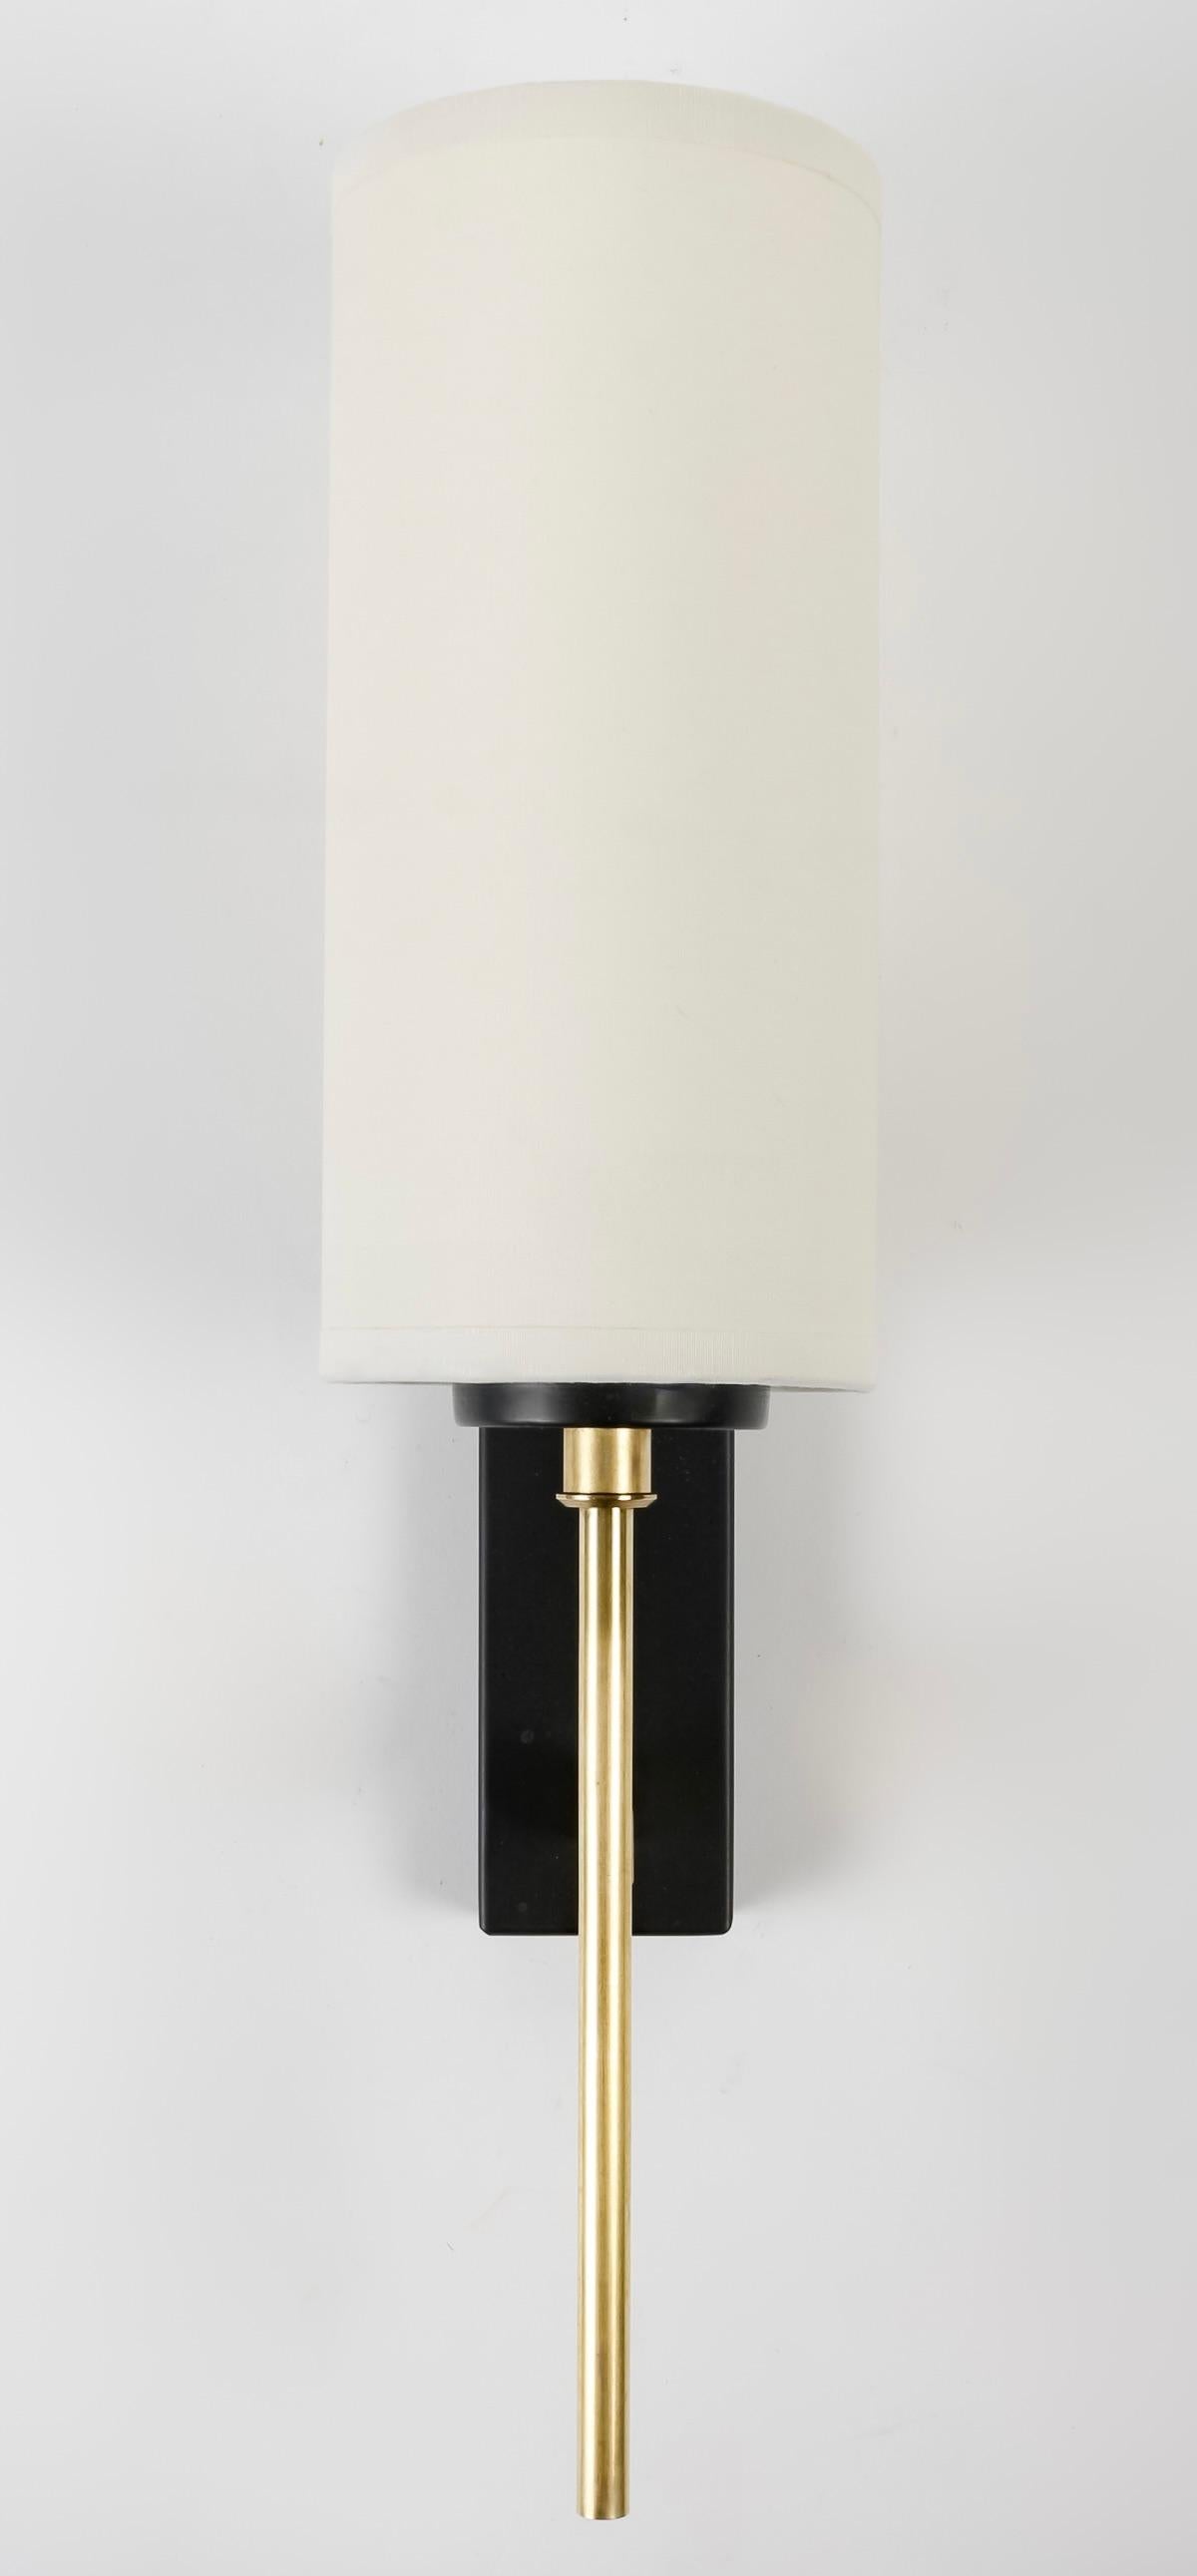 1950 Pair of Wall Lights Maison Lunel

Comprising a rectangular blackened brass wall plate supporting a round gilded brass stem, topped by a matching off-white cotton lampshade, highlighted at its base by a blackened brass cup.

1 bulb per sconce.